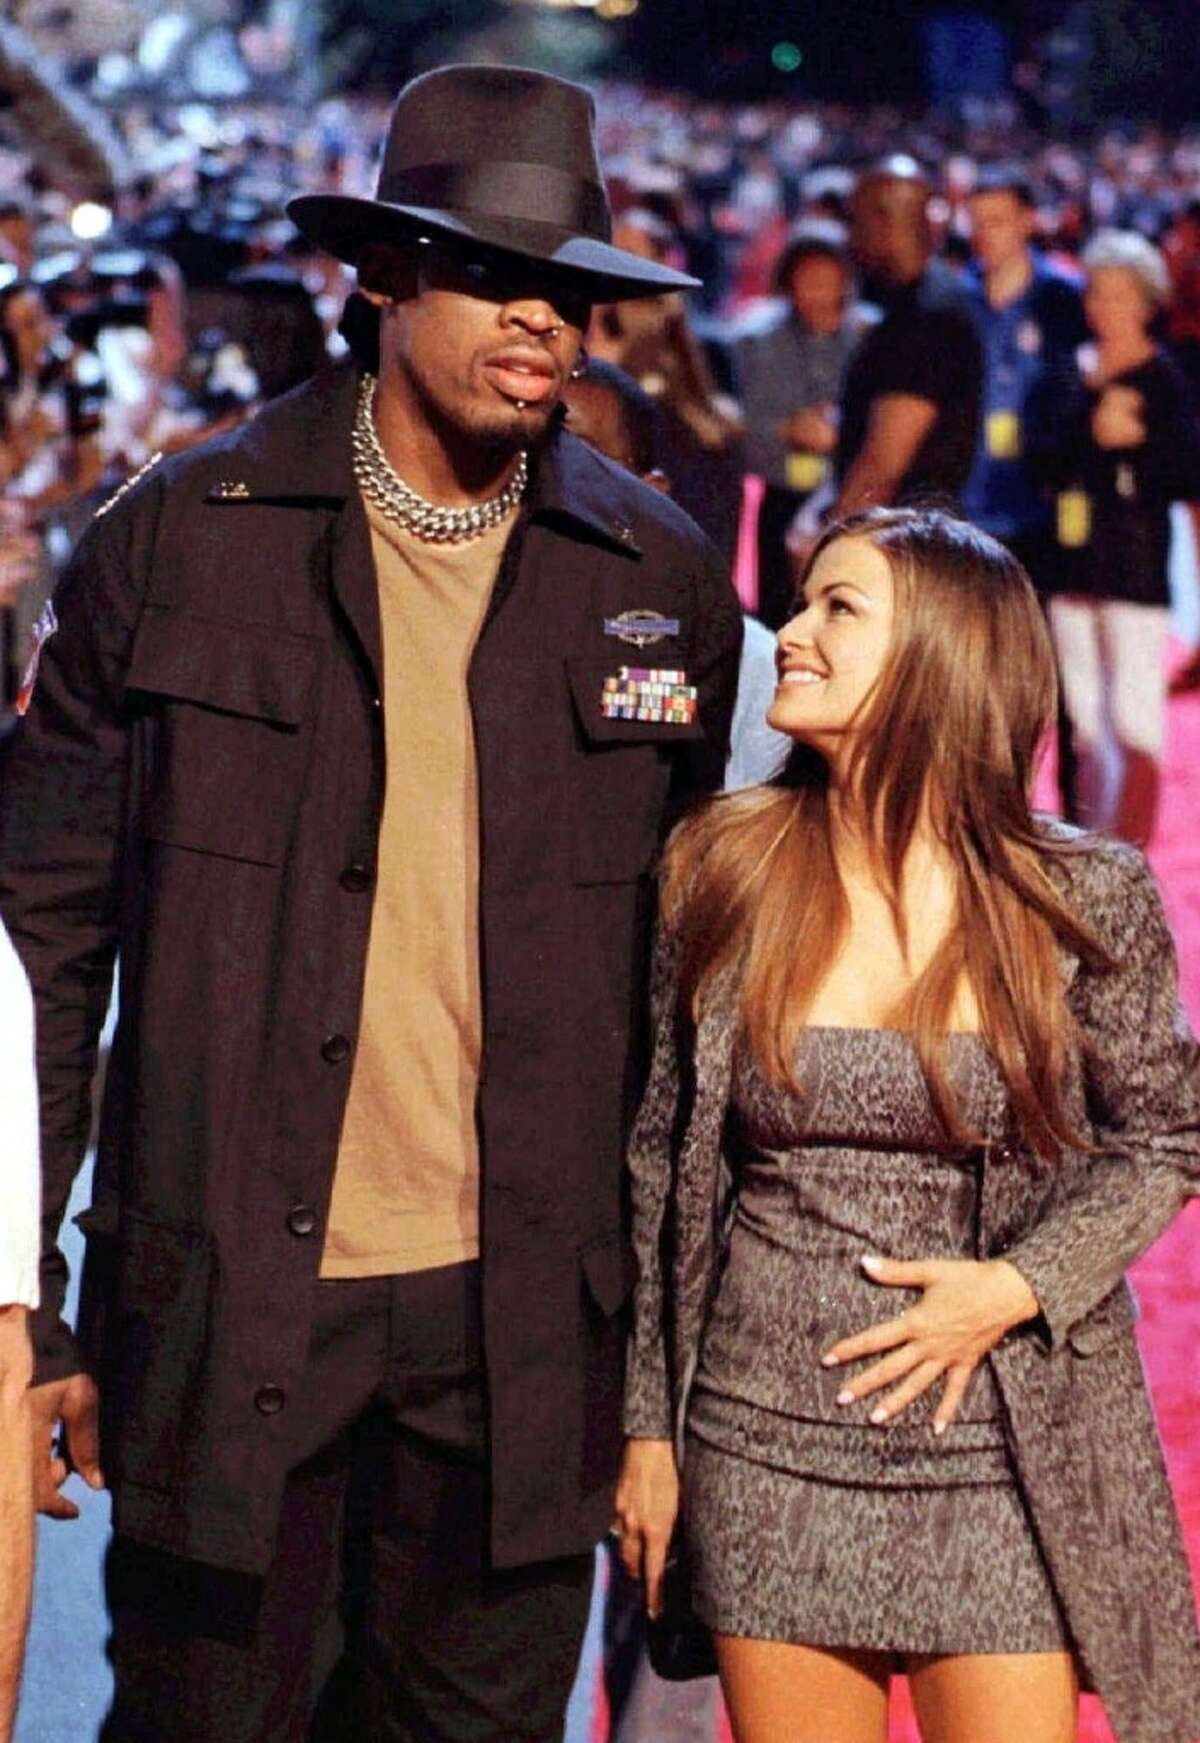 Dennis Rodman and Carmen Electra The rebounding machine and actress were married after a reported all-night bender in Las Vegas. The couple called it quits after just six months.